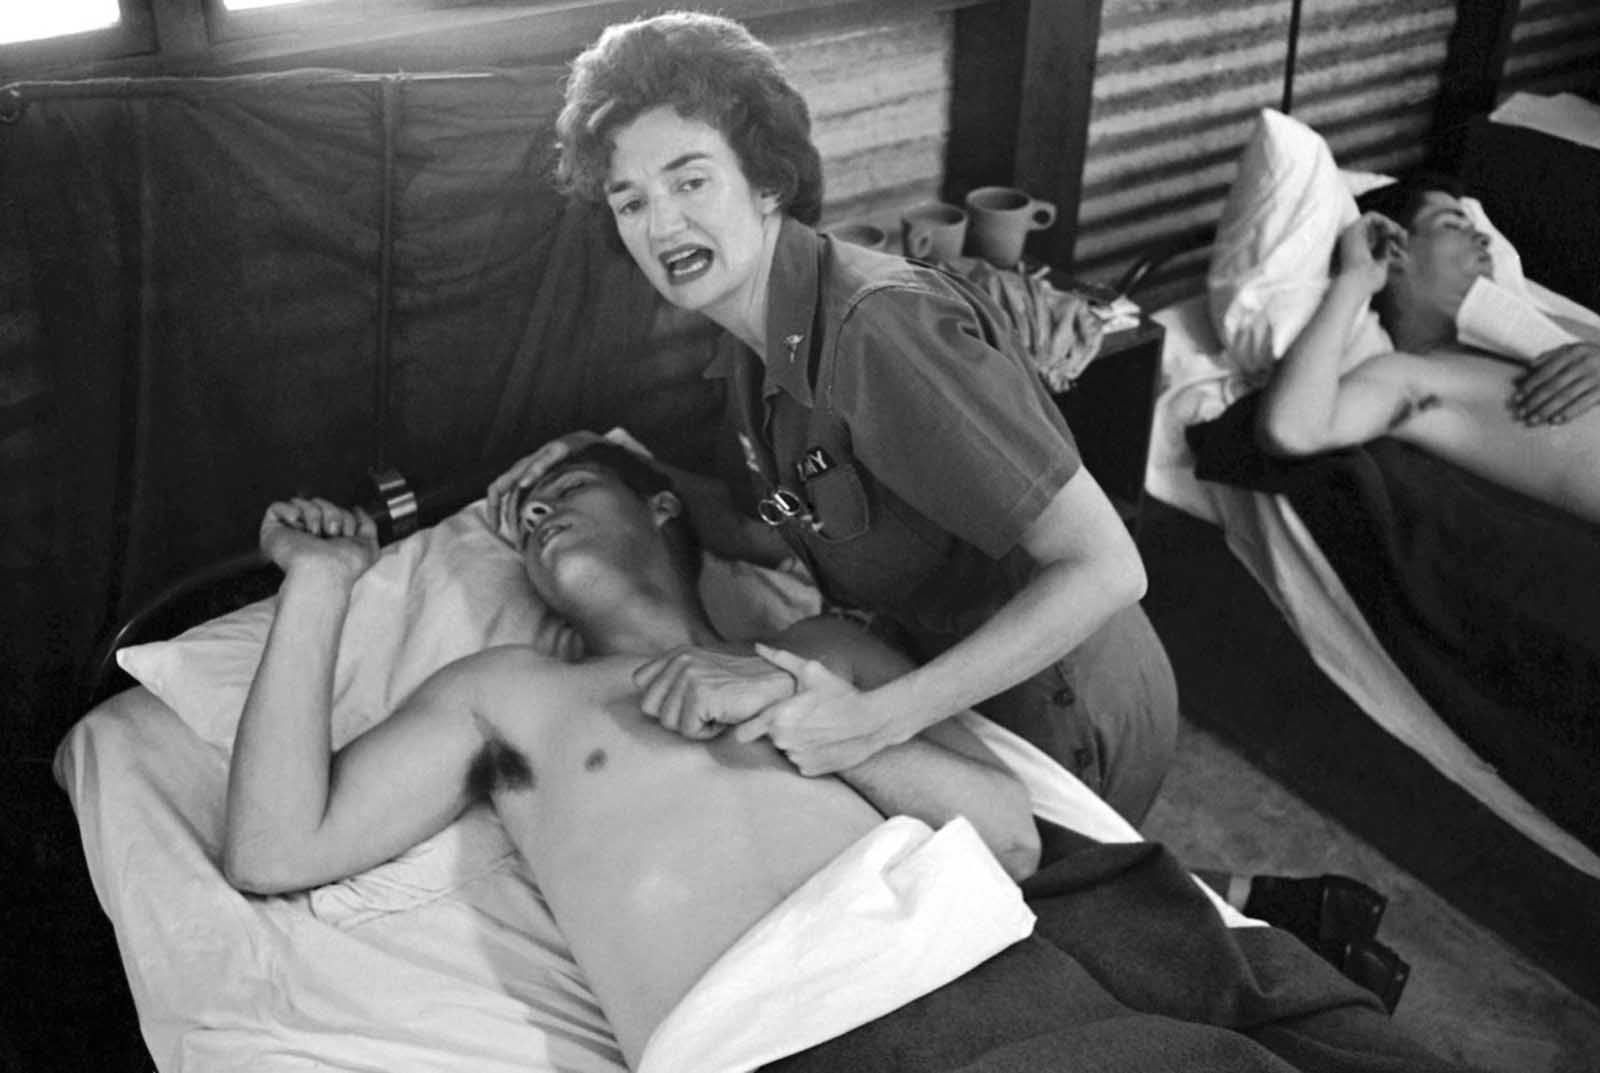 A nurse attempts to comfort a wounded U.S. Army soldier in a ward of the 8th army hospital at Nha Trang in South Vietnam on February 7, 1965. The soldier was one of more than 100 who were wounded during Viet Cong attacks on two U.S. military compounds at Pleiku, 240 miles north of Saigon. Seven Americans were killed in the attacks.